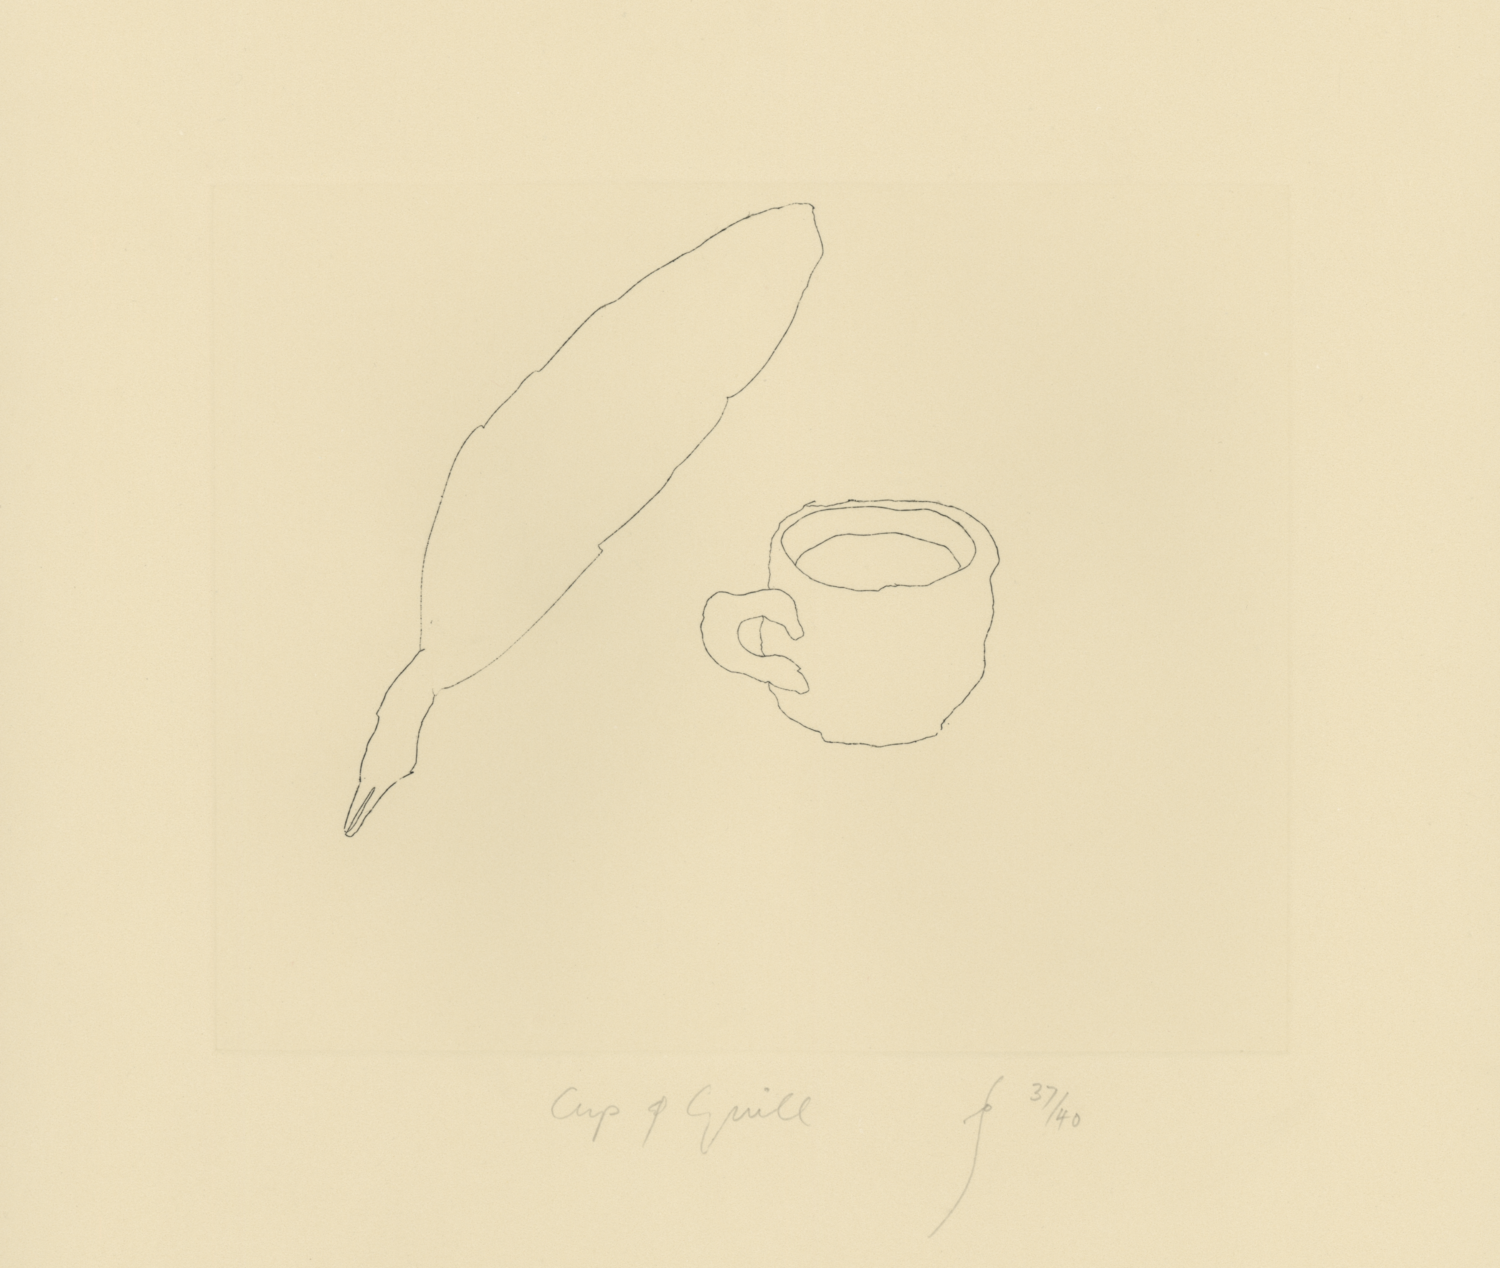 Cup and Quill (1983)